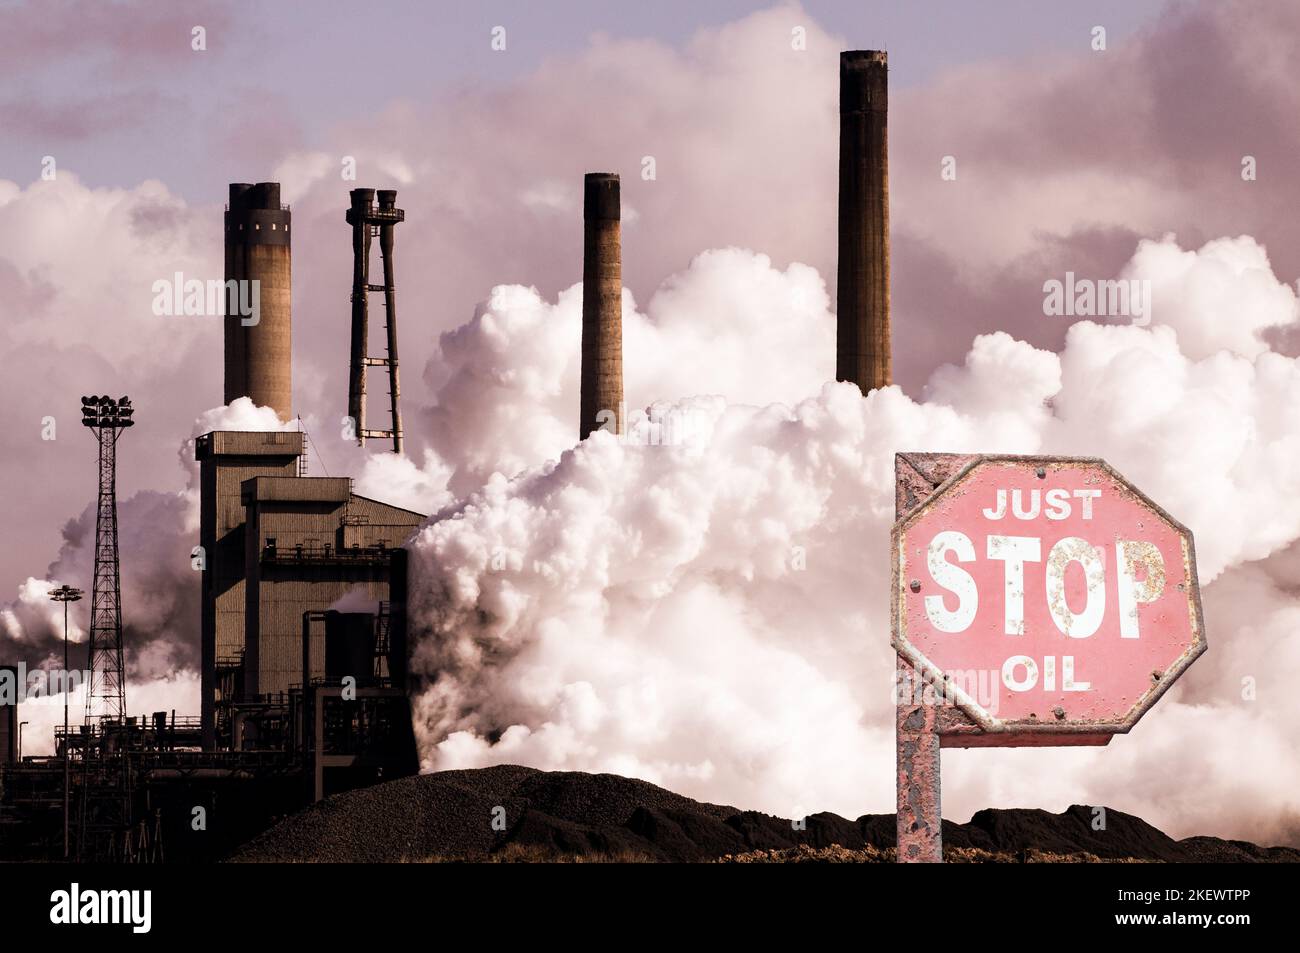 Just Stop Oil sign near steelworks blast furnace. Global warming, climate crisis, fossil fuels, net zero, energy crisis...concept Stock Photo